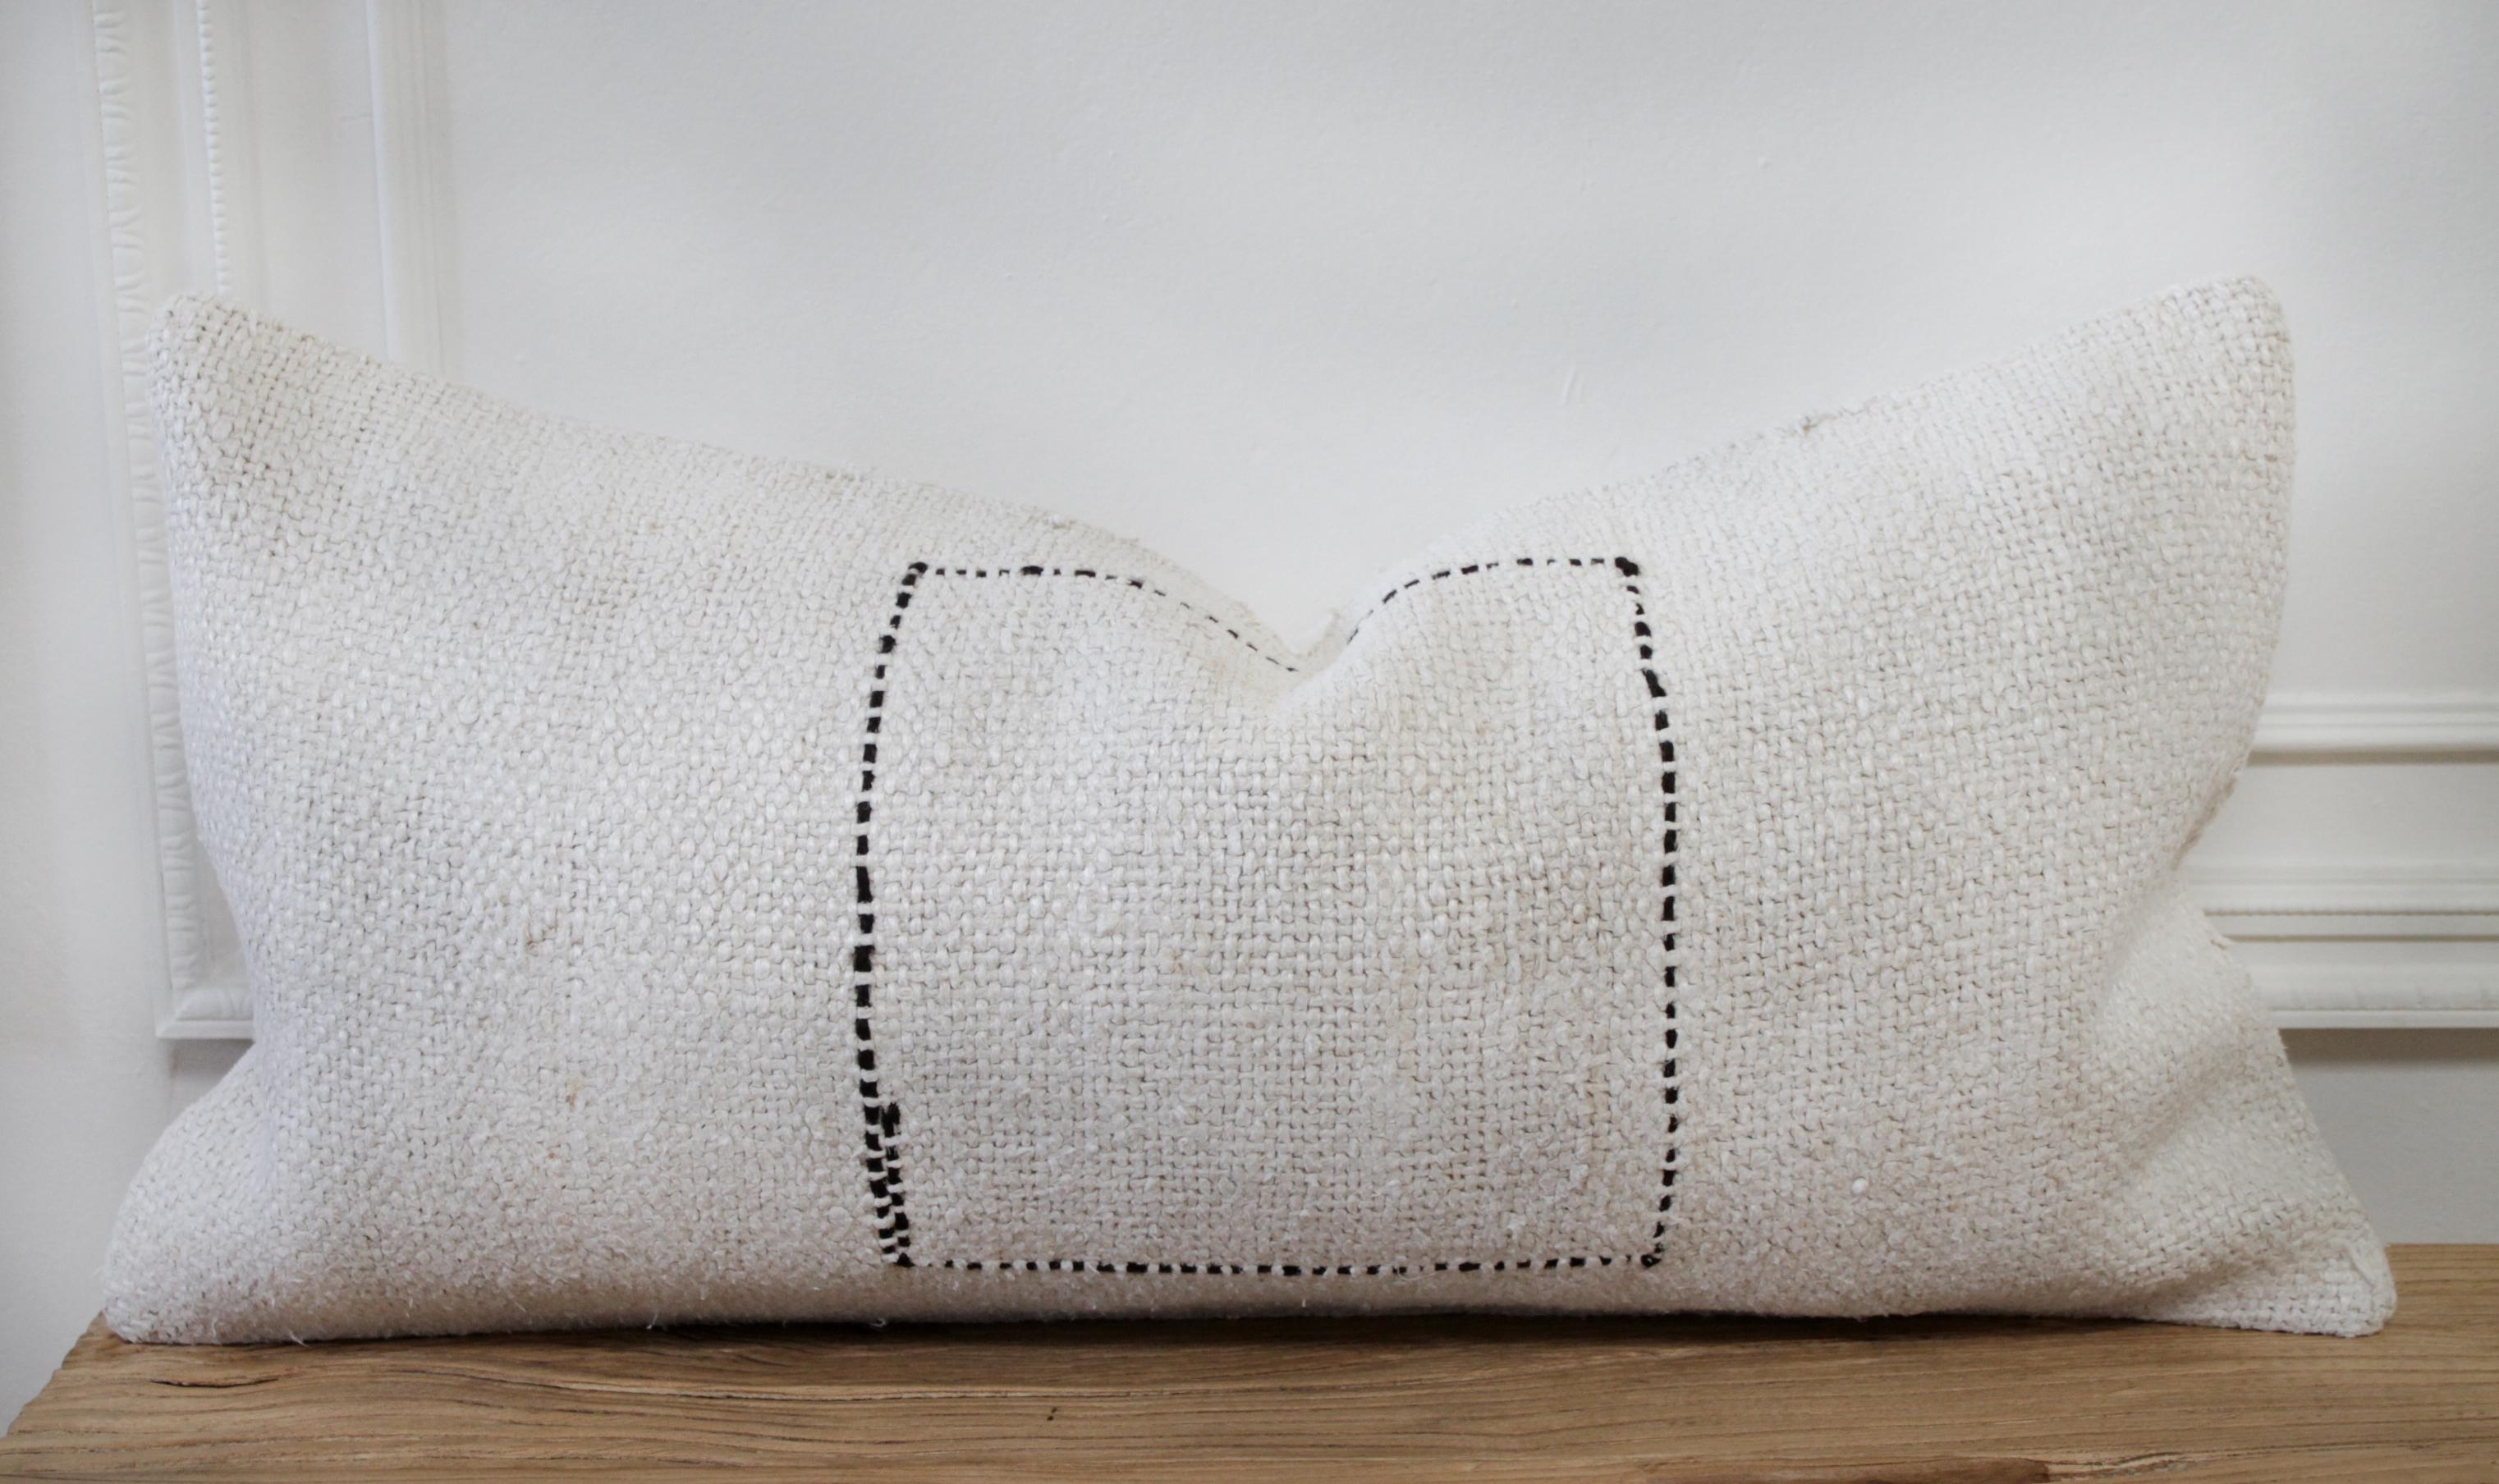 Vintage Turkish Hemp rug pillow in off-white with stitched pattern on face of the pillow. This is a beautiful original hemp rug, in a white to off white color with goat hair textured minimalist square pattern. The backside is a coordinating fabric